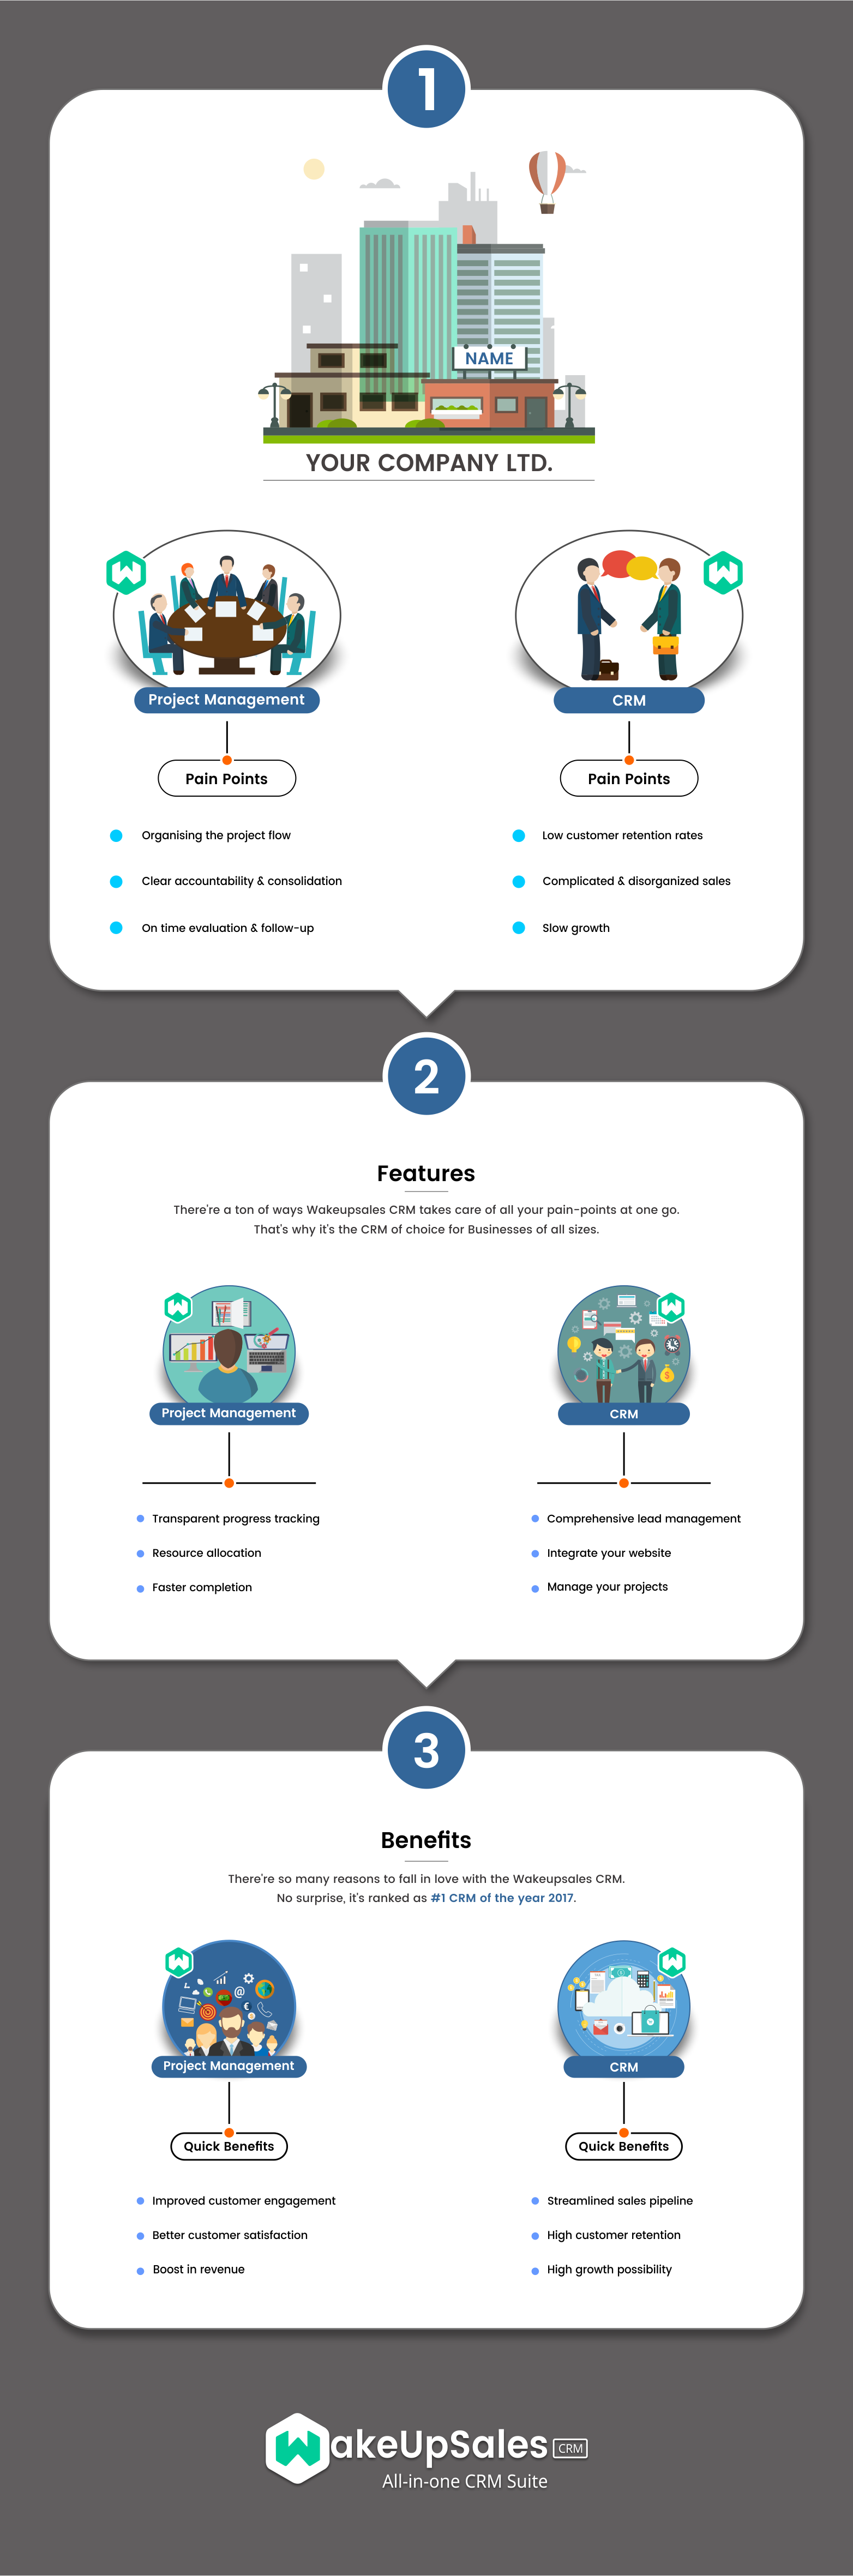 WUS CRM Project Management Infographic 1What Does Wakeupsales CRM Solve?